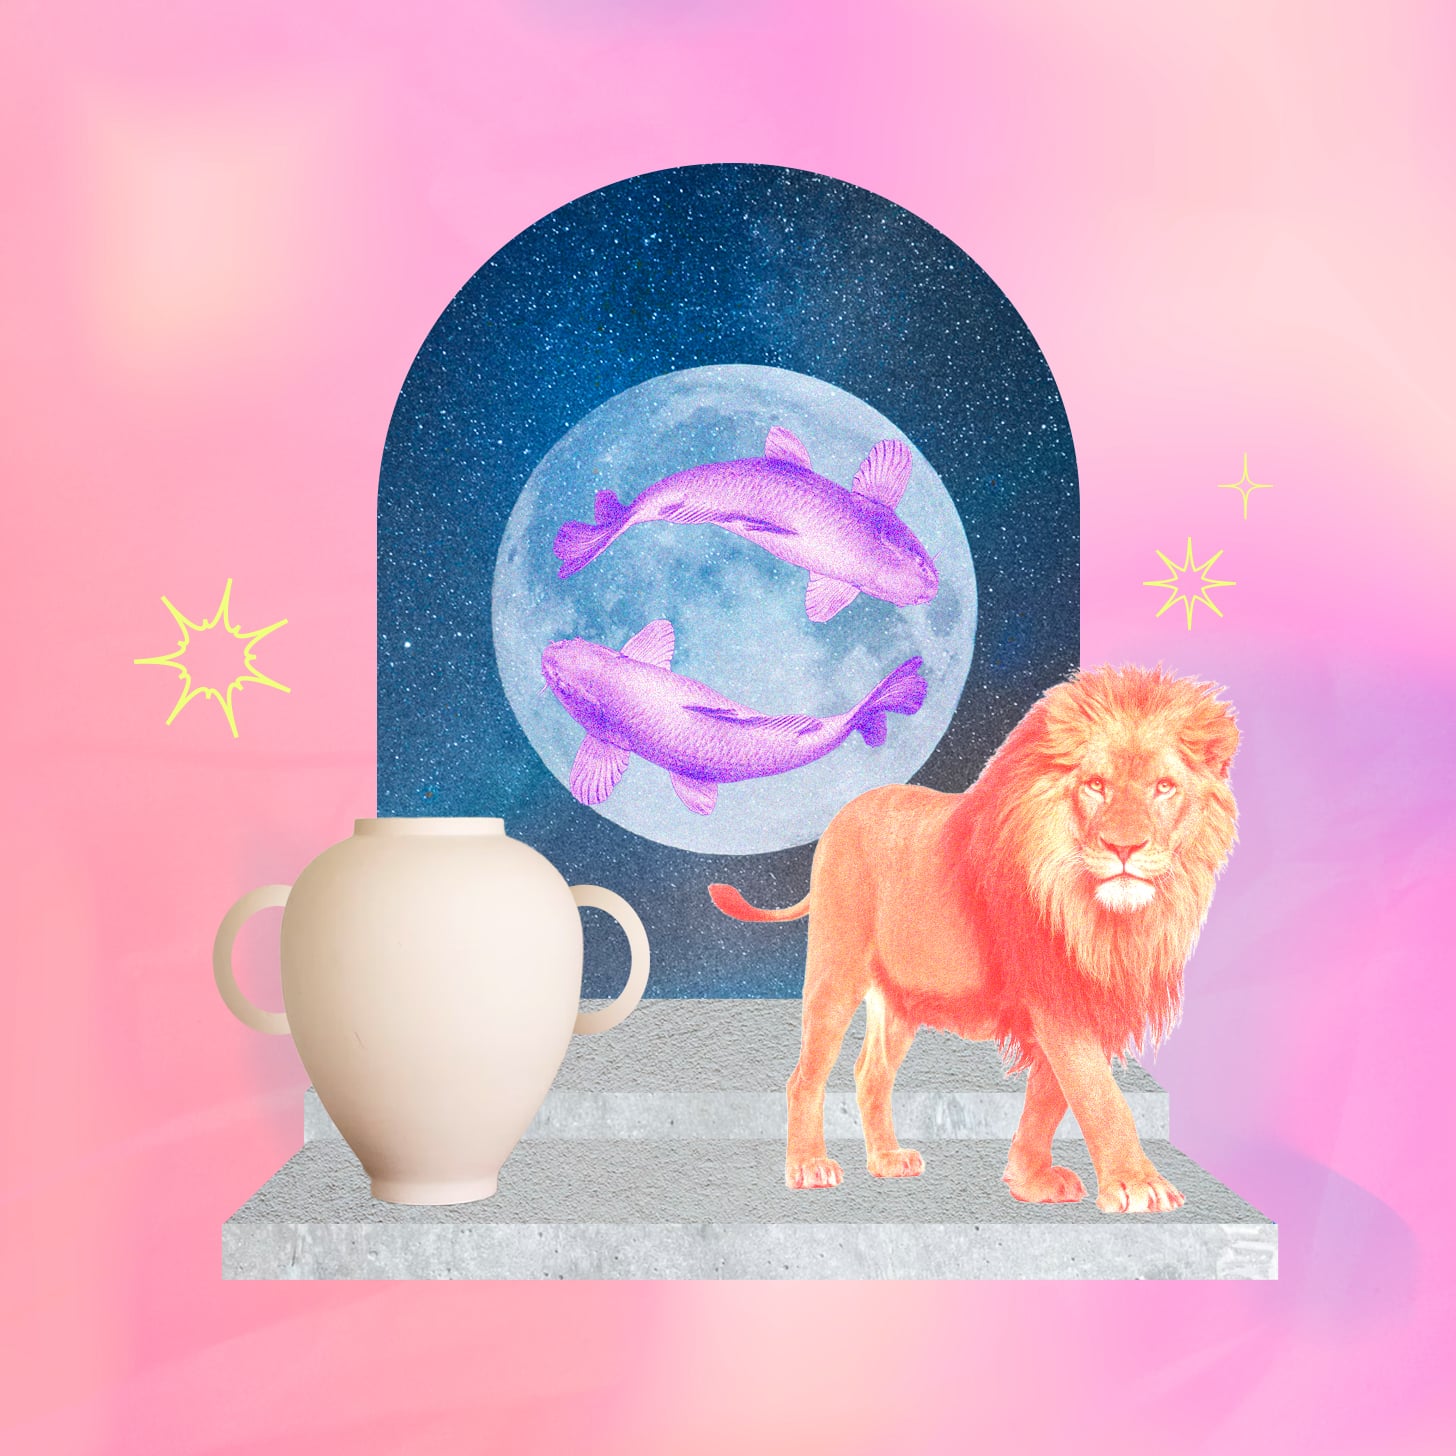 Weekly horoscope for July 31, 2022